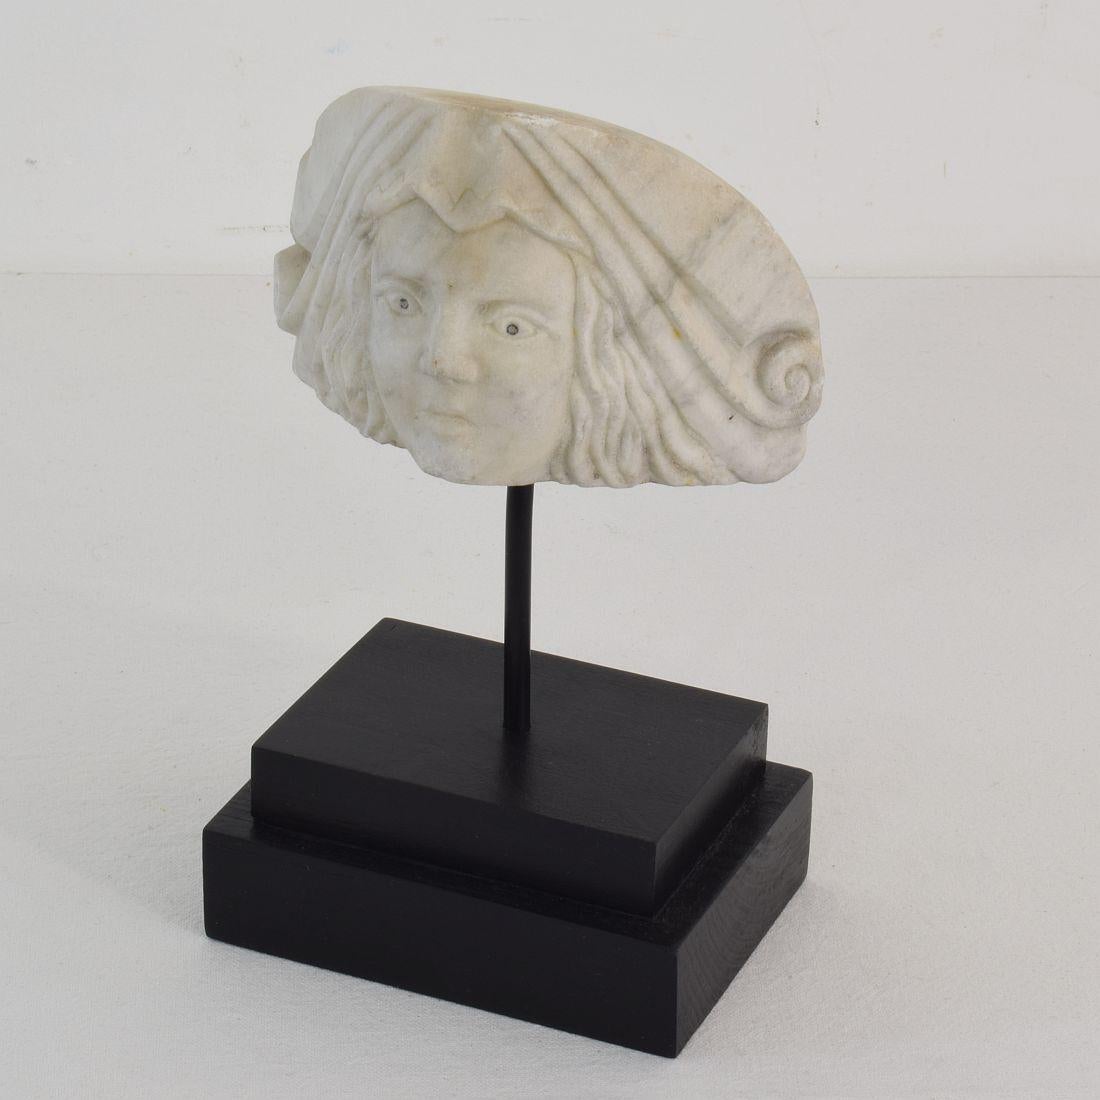 Beautiful weathered neoclassical marble fragment representing a head.
Italy, circa 1800-1840. Weathered
Measurement here below includes the wooden base.